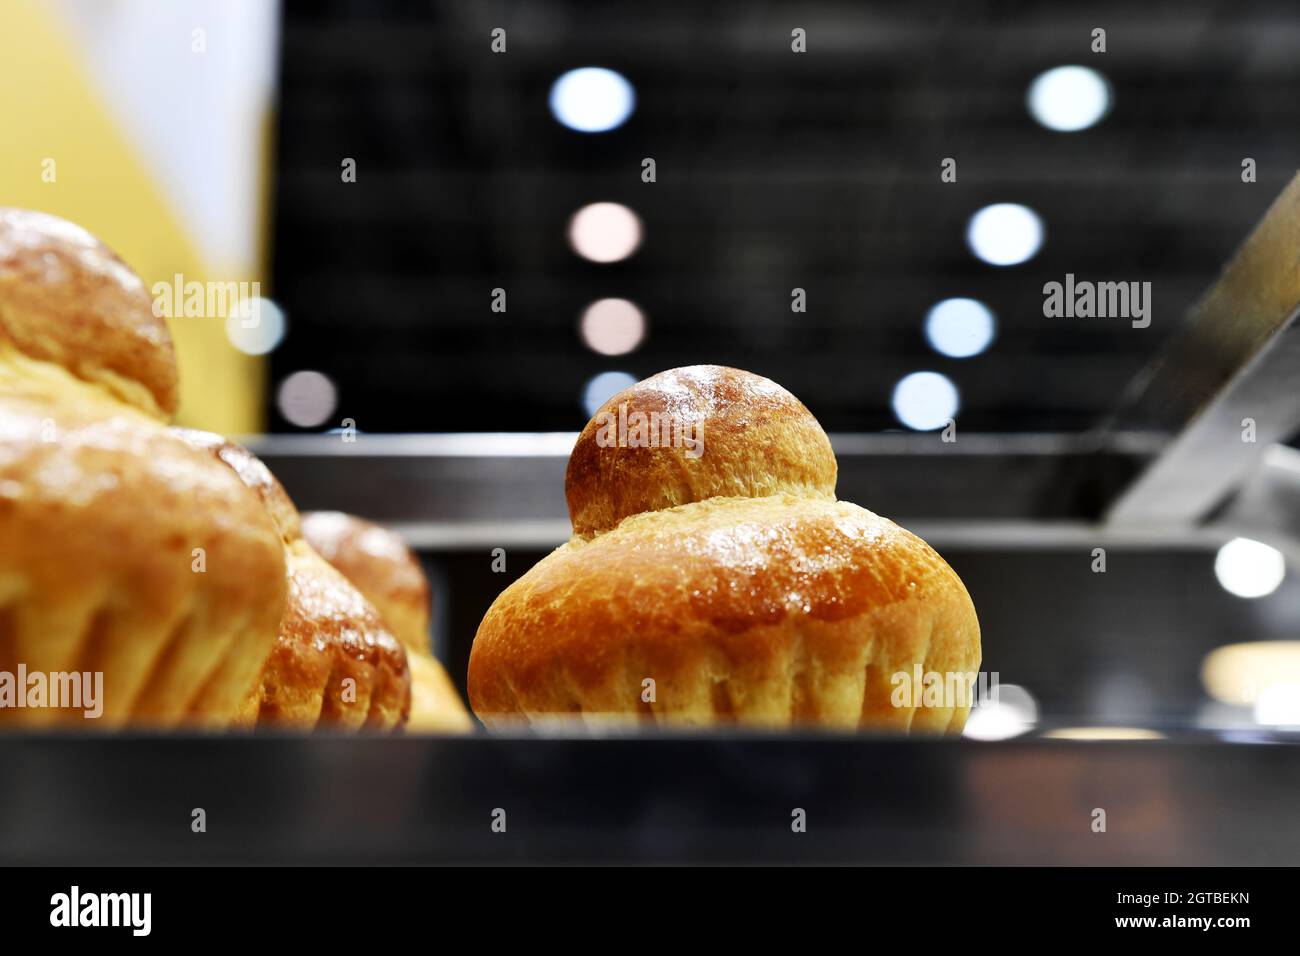 French bakery products - Lyon - France Stock Photo